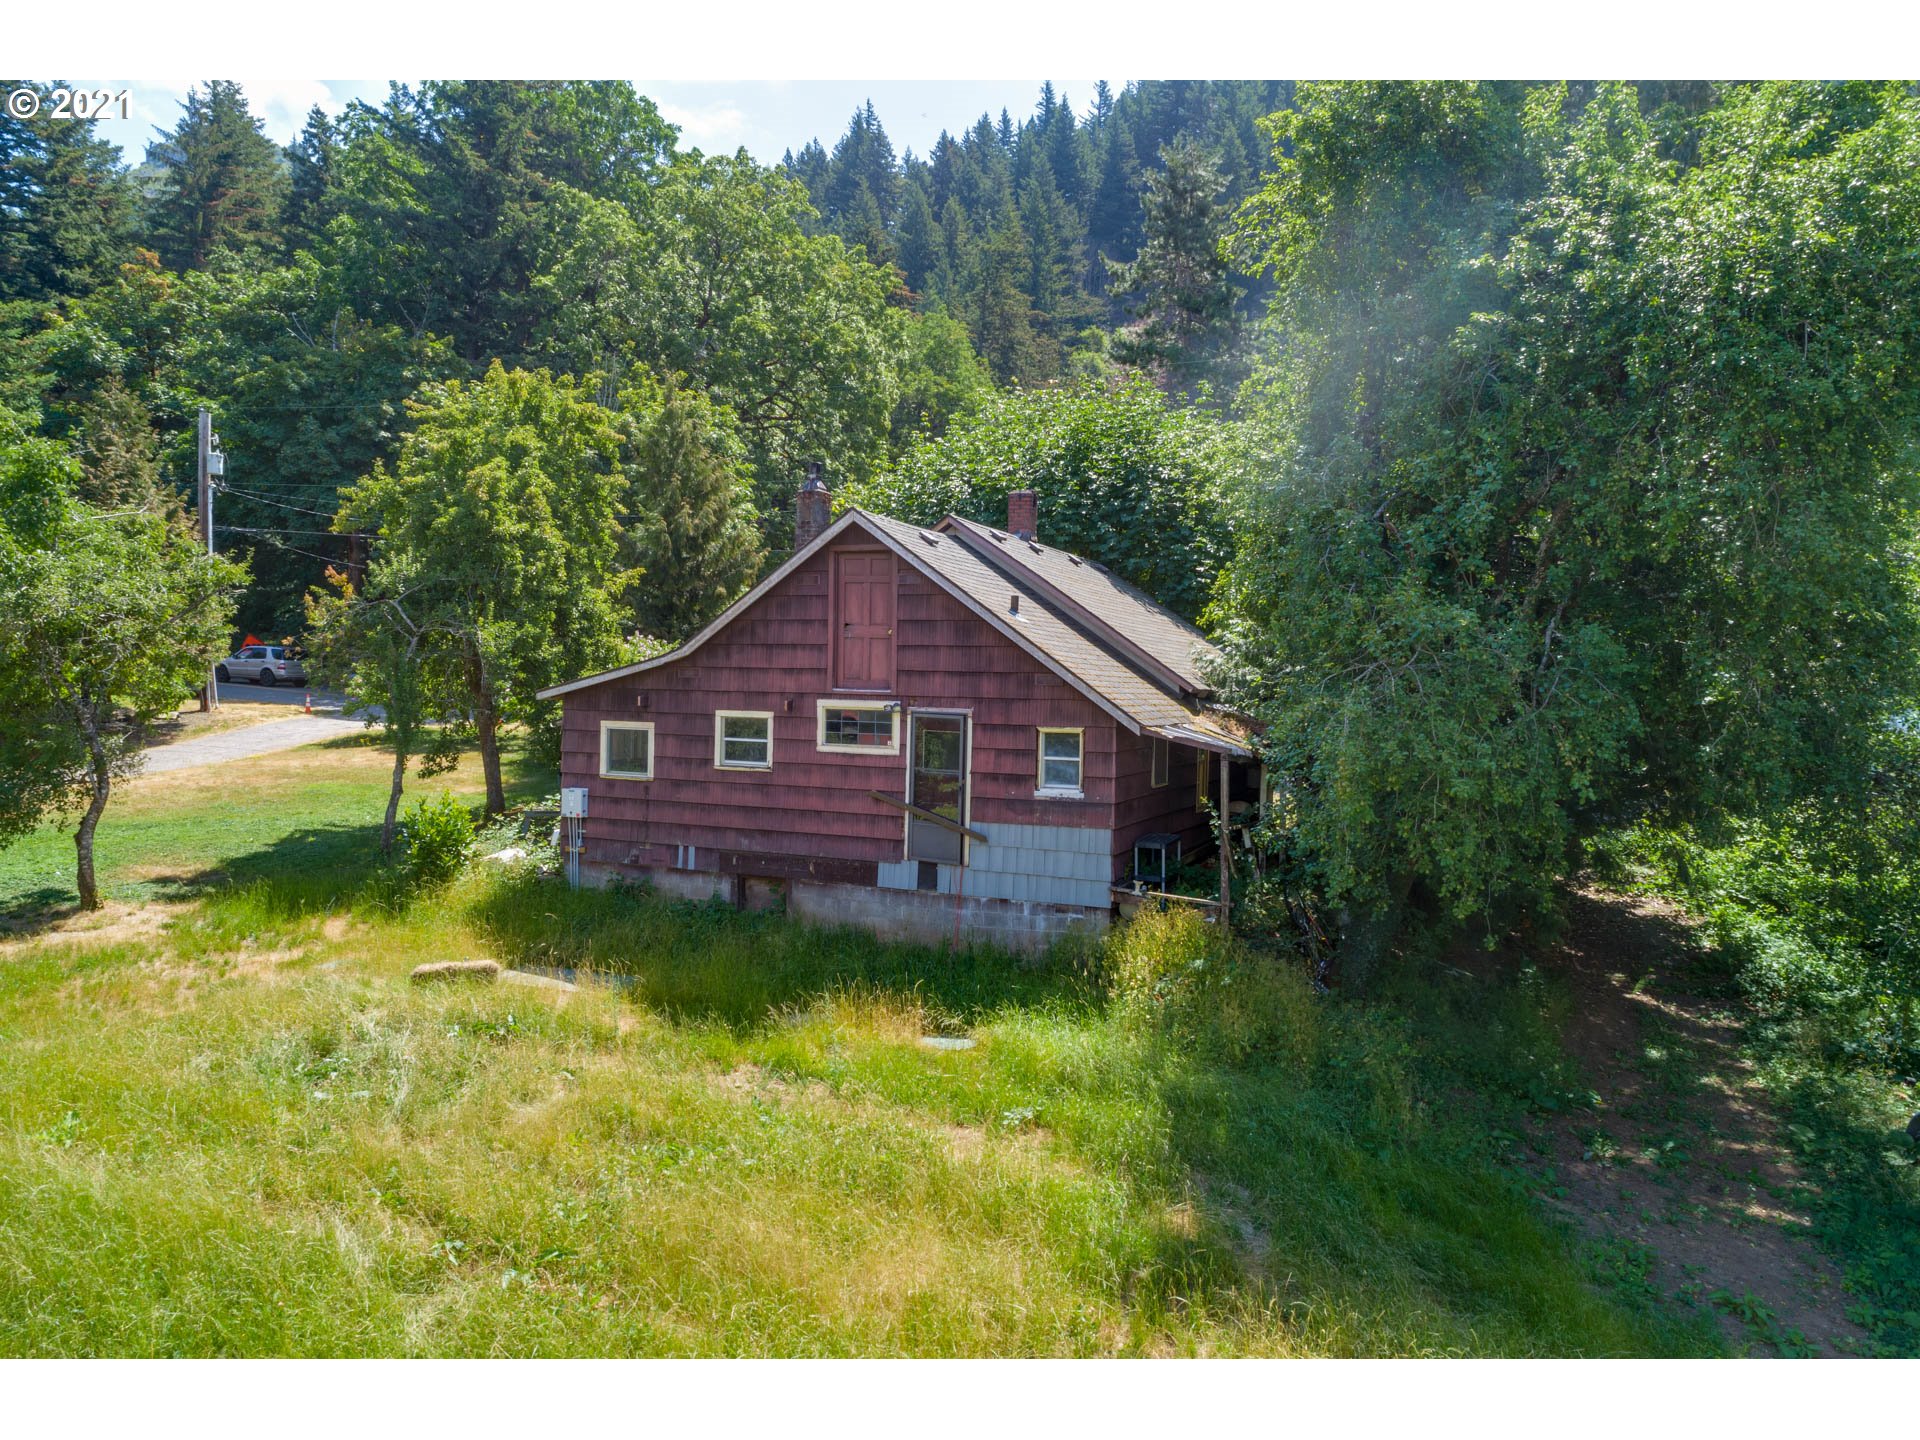 47925 E HIST COLUMBIA RIVER HWY (1 of 17)